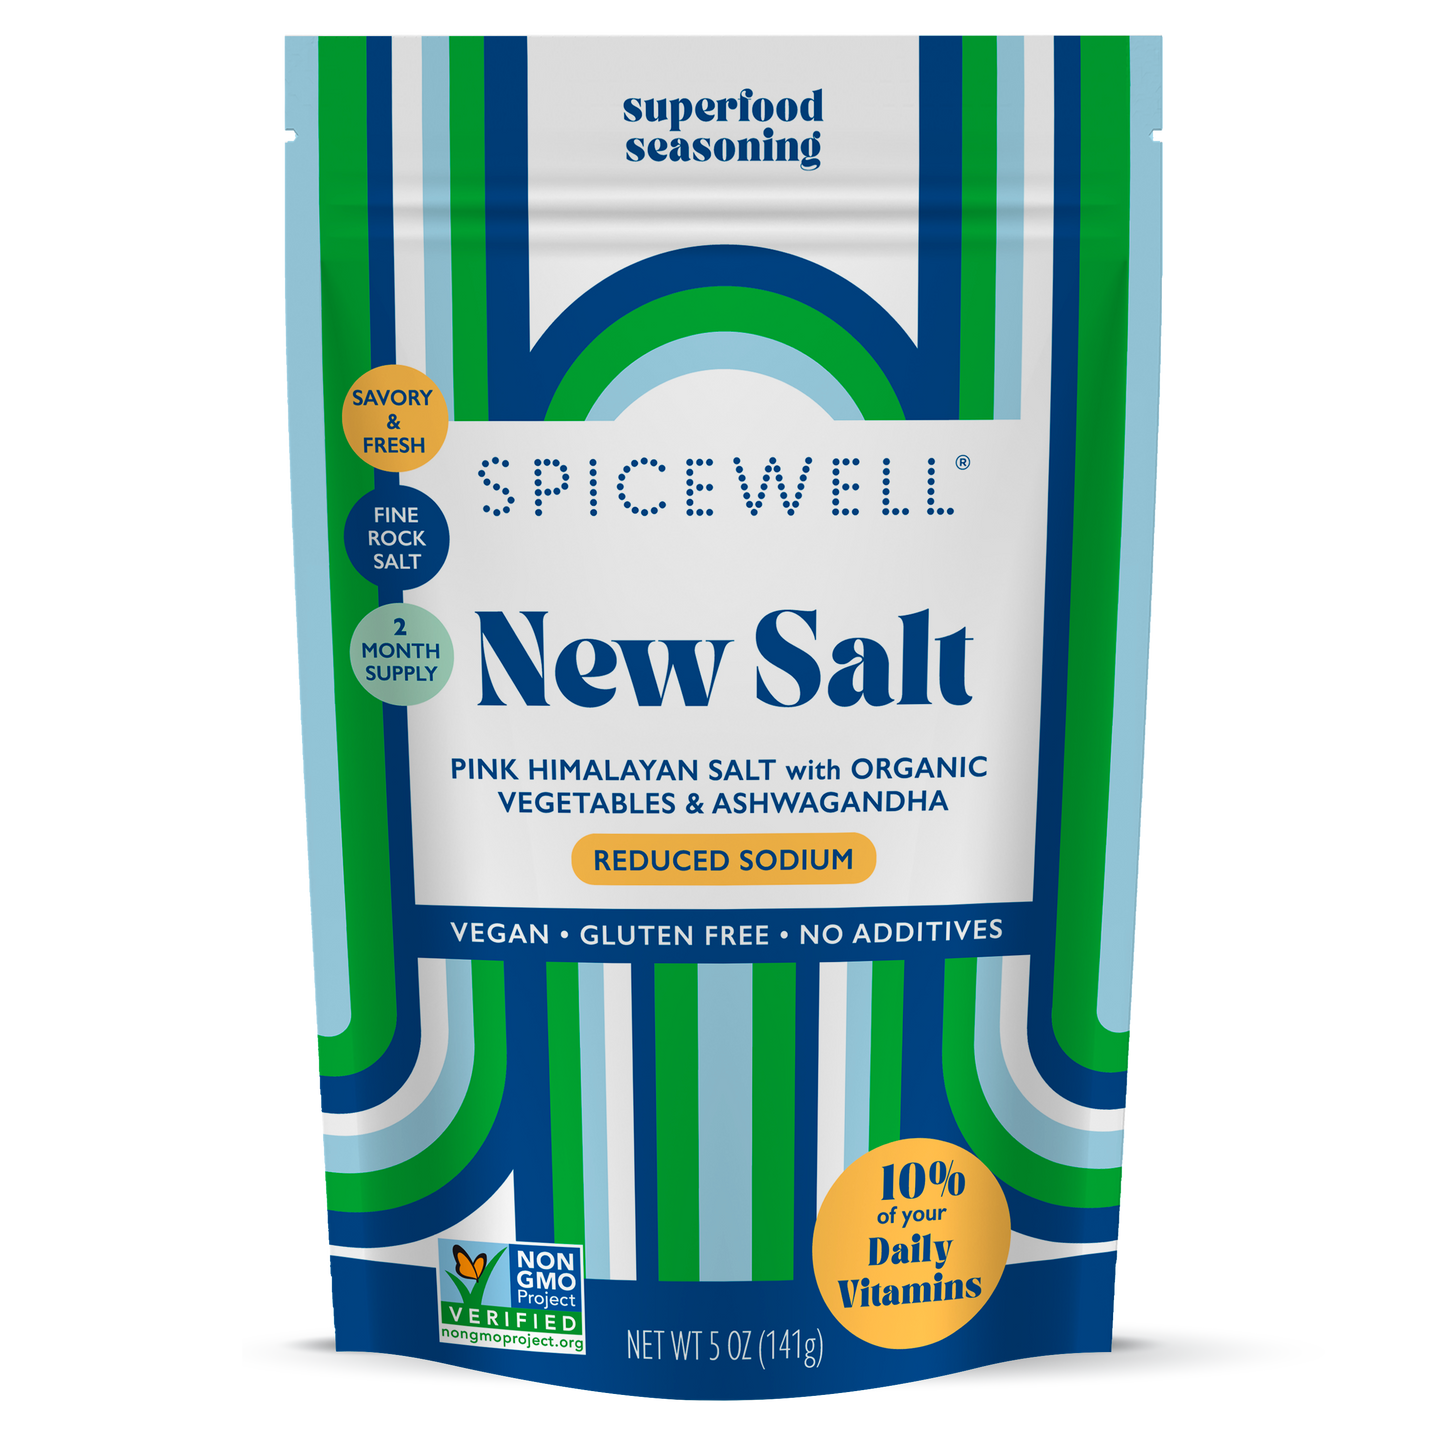 Superfood Salt & Pepper Duo by Spicewell